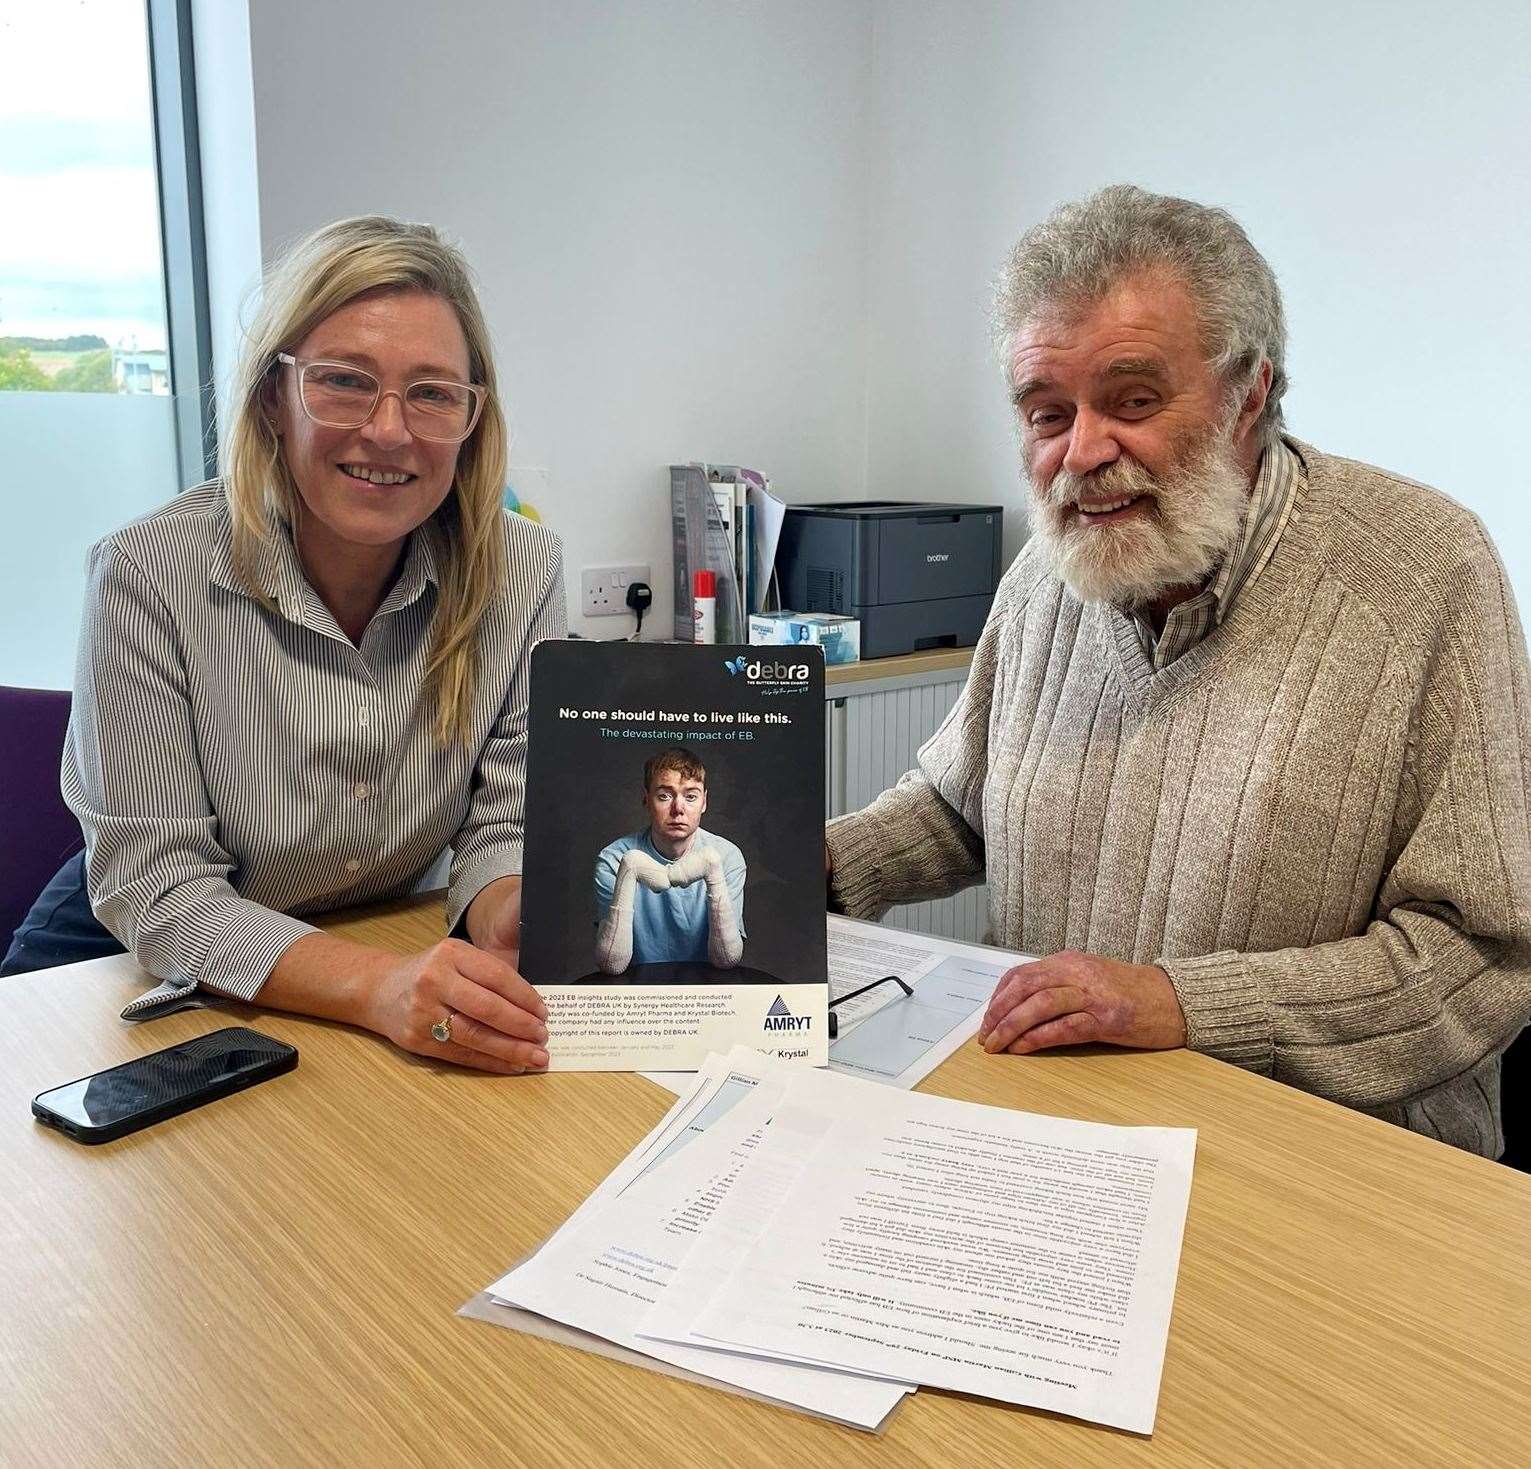 Earlier this month I was able to meet with my constituent John McKenzie who was keen to highlight the work he has been doing with the charity Debra.